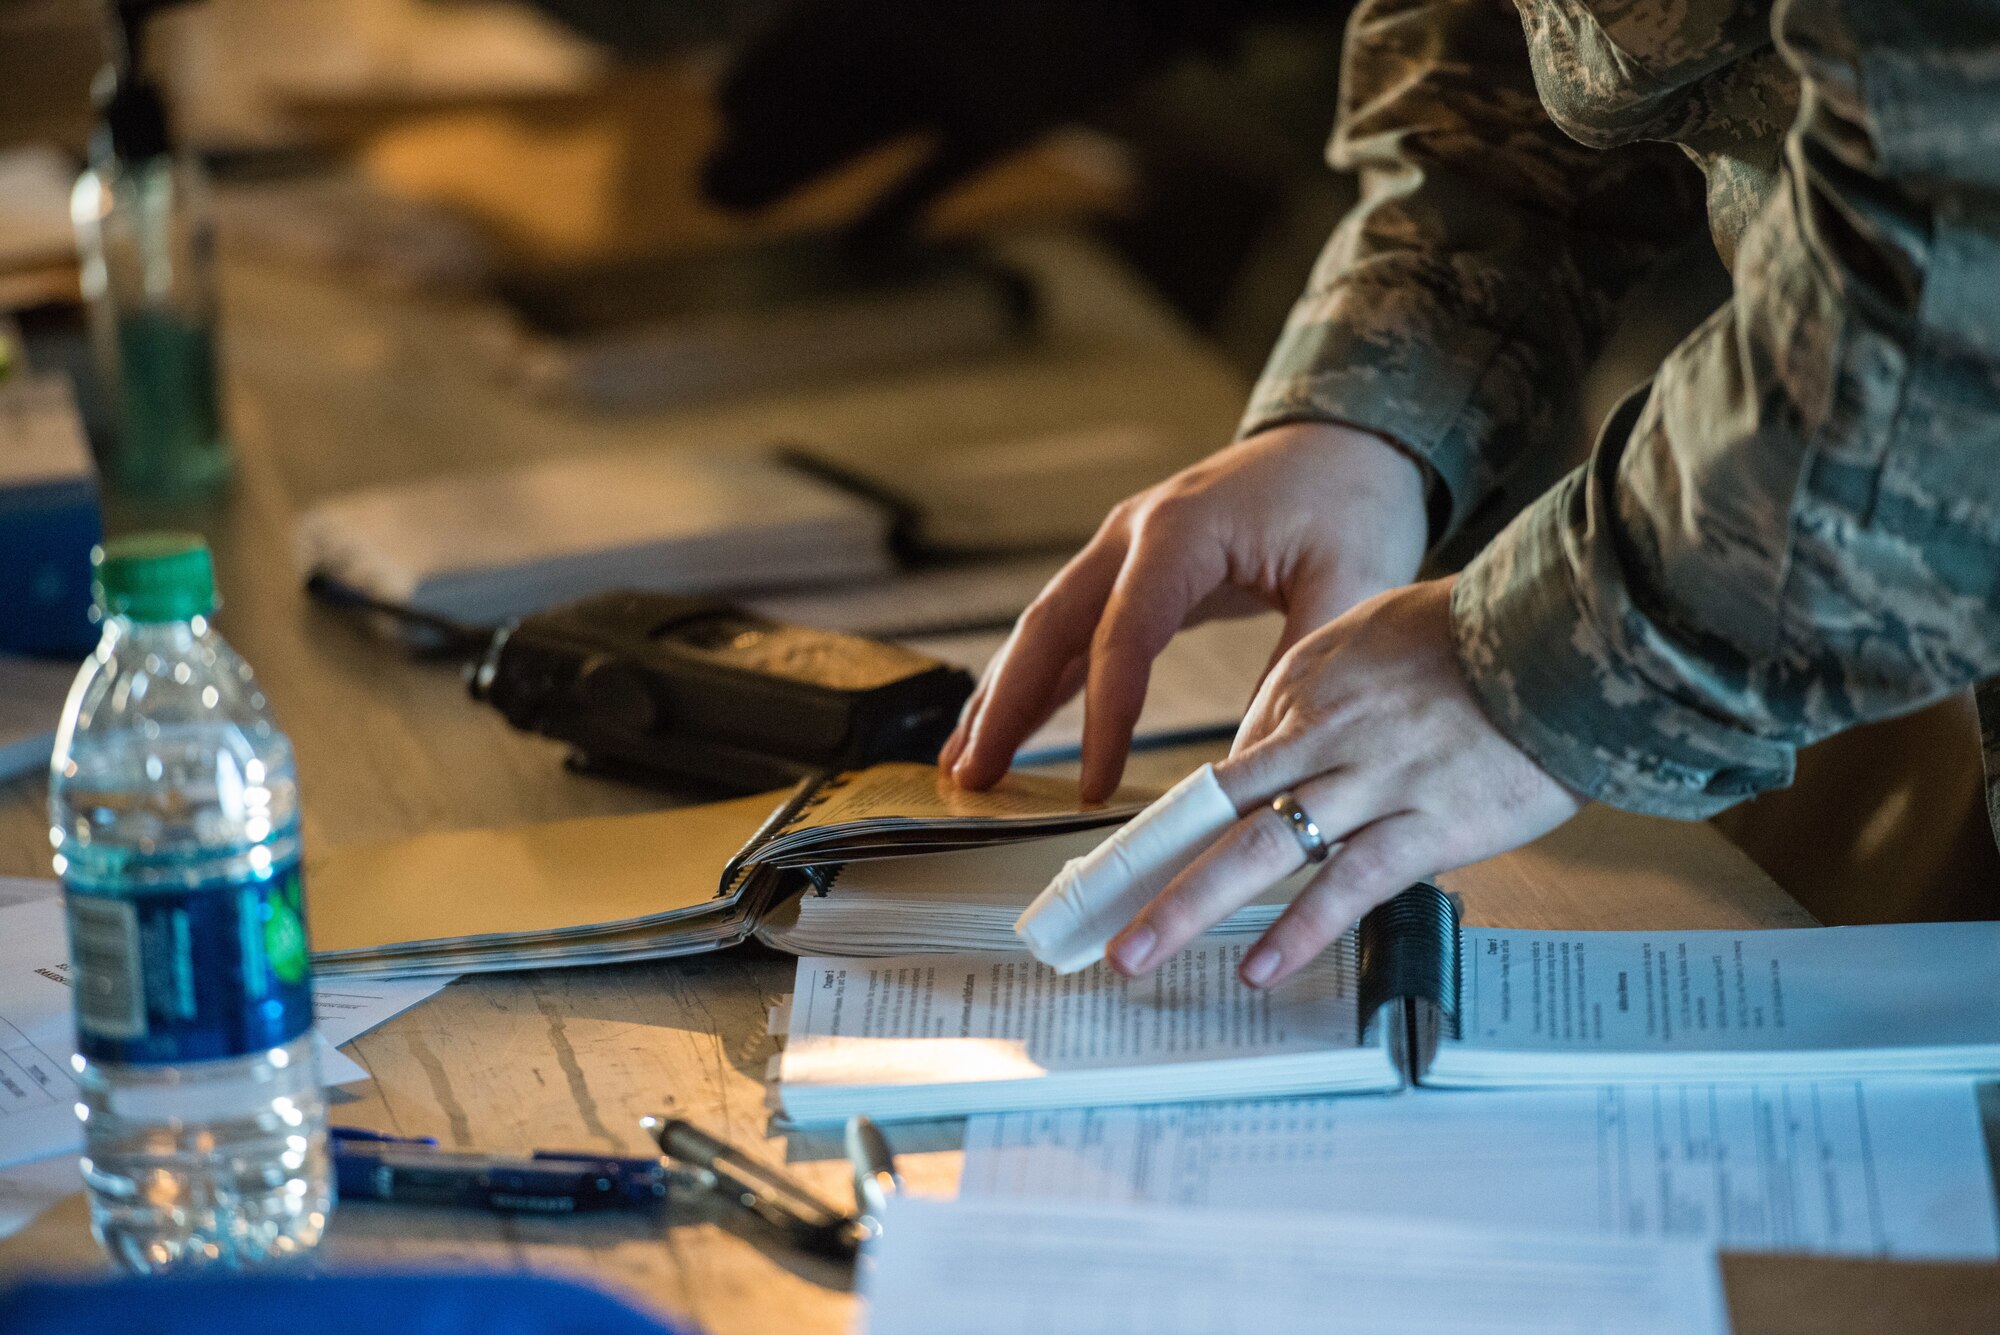 An Airman from the 56th Contracting Squadron reviews the Air Force Manual 10-100 Airman’s Manual during an exercise Feb. 23, 2018, at Luke Air Force Base, Ariz. The Airman’s Manual is a pocket-sized, quick reference guide containing Air Force instructions, visual aids and operational guidelines. (U.S. Air Force photo by Airman 1st Class Caleb Worpel)